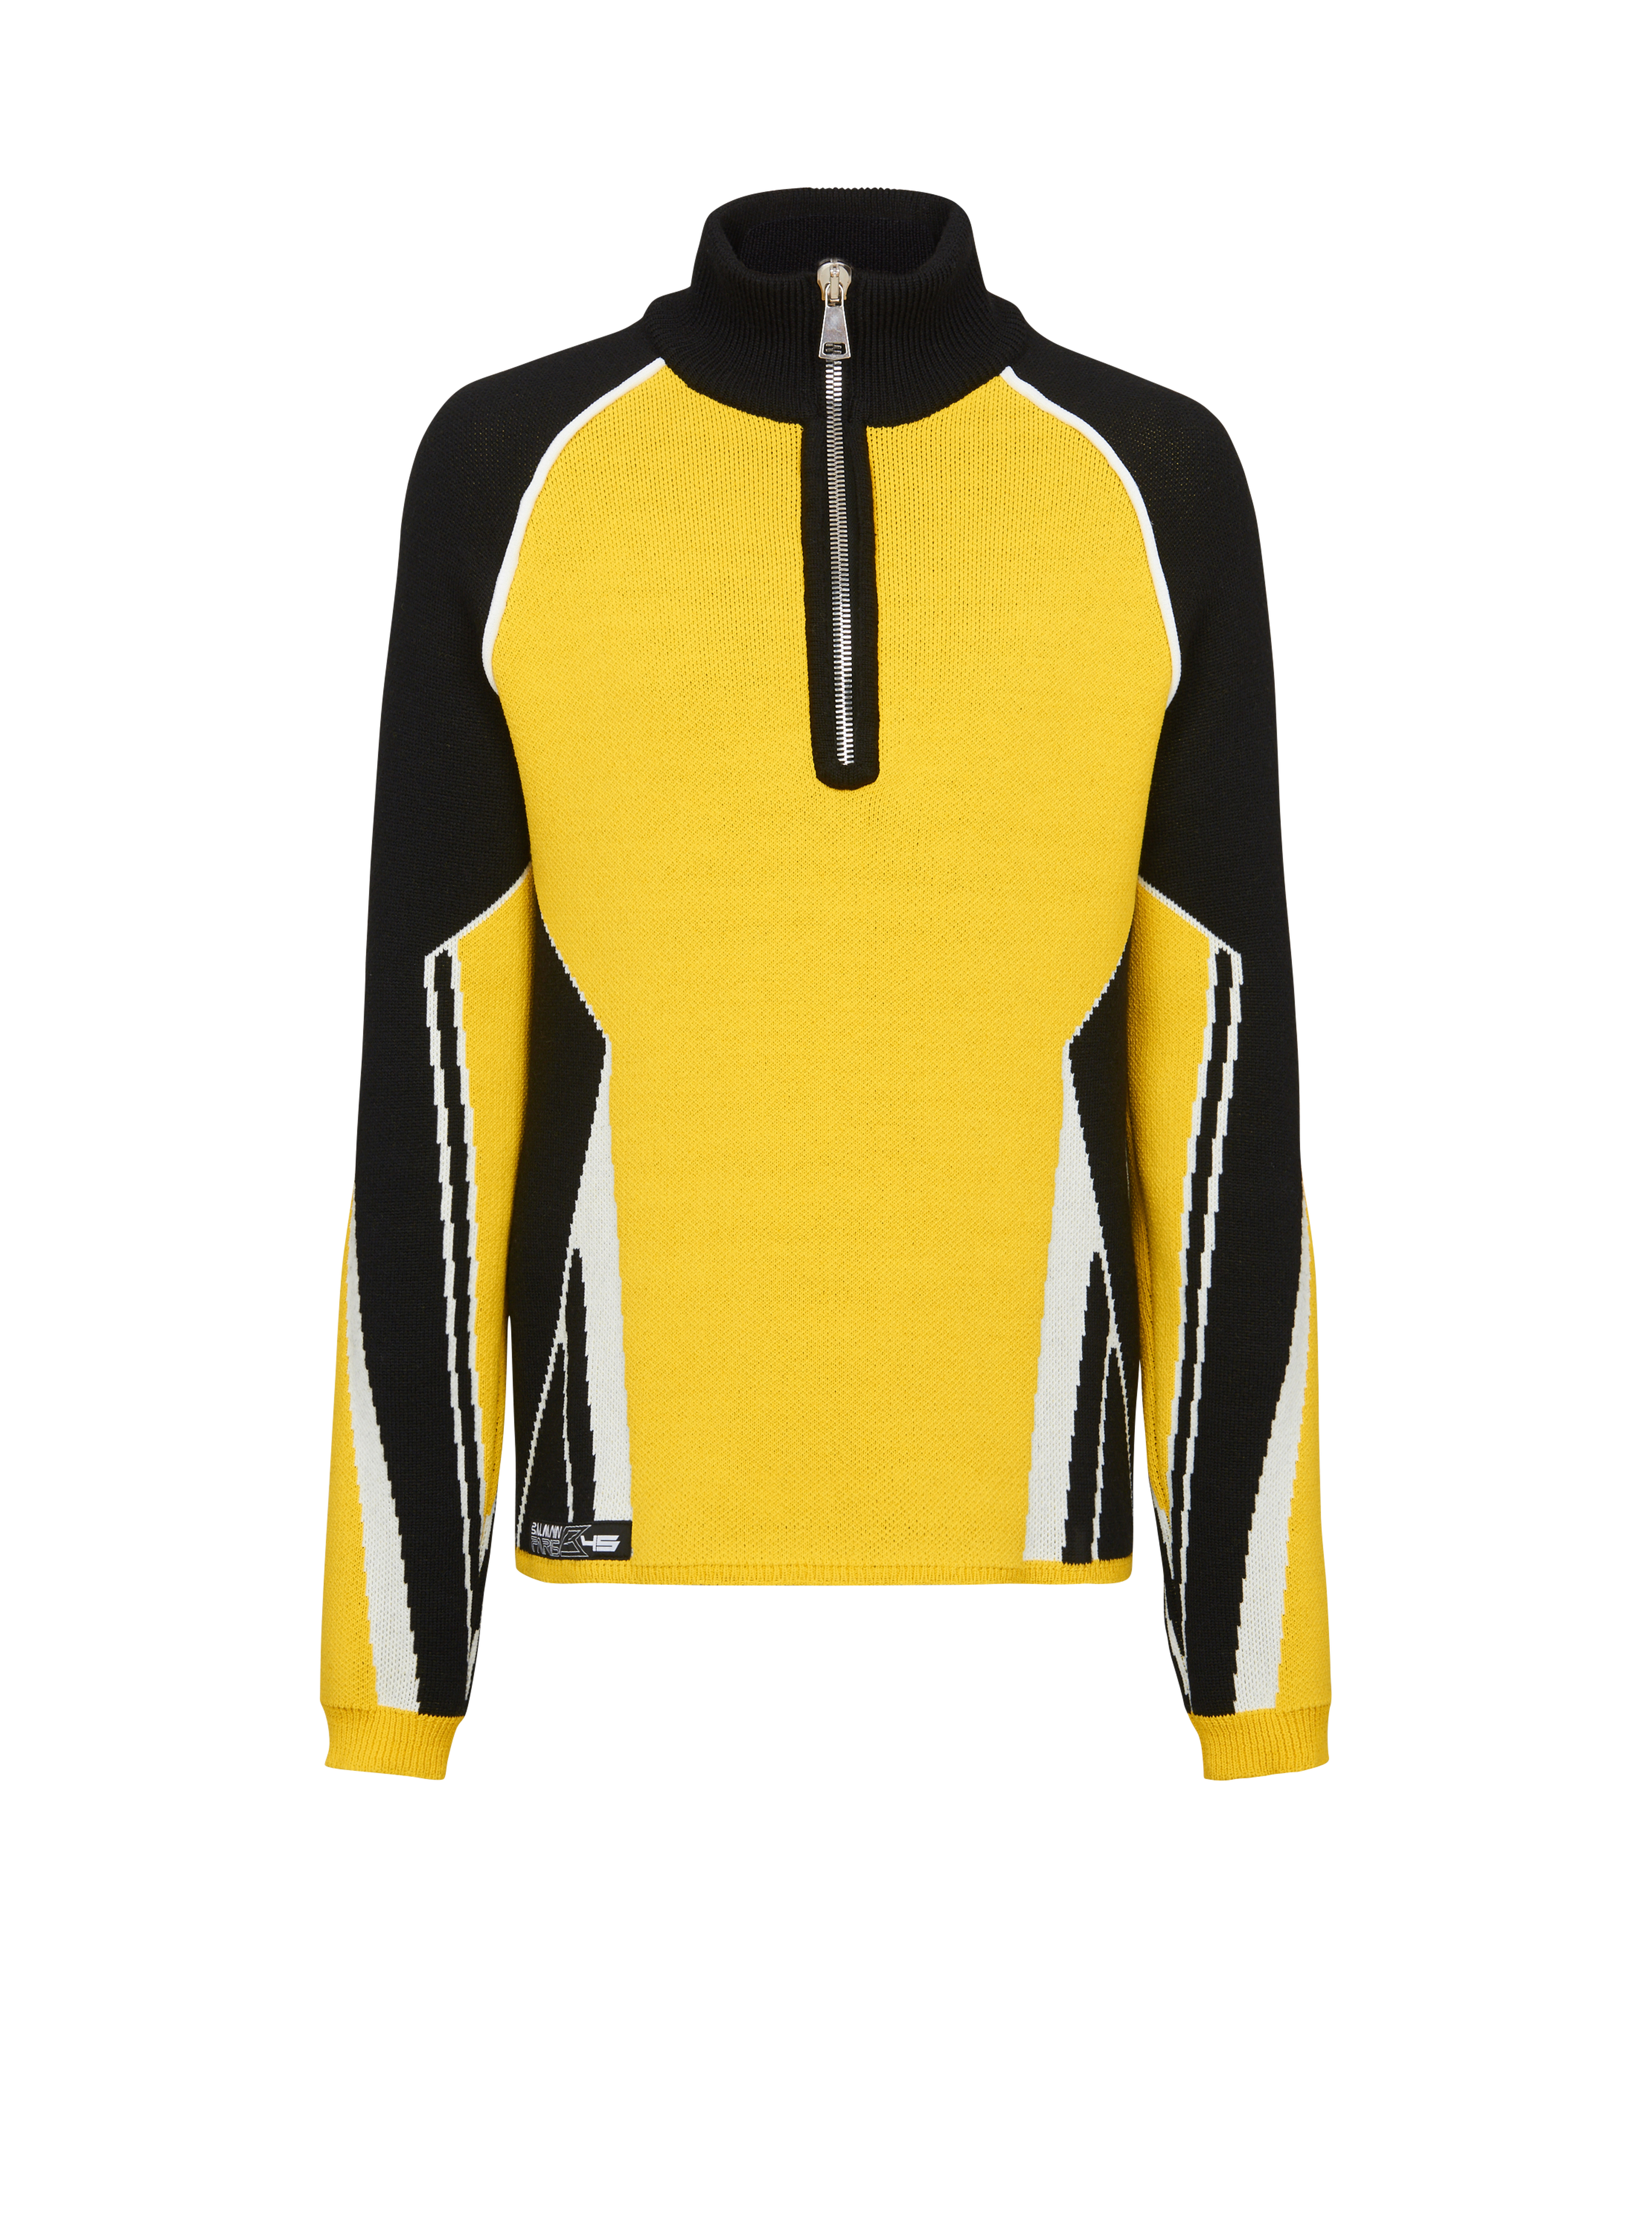 Wool jumper with embroidered Balmain logo, yellow